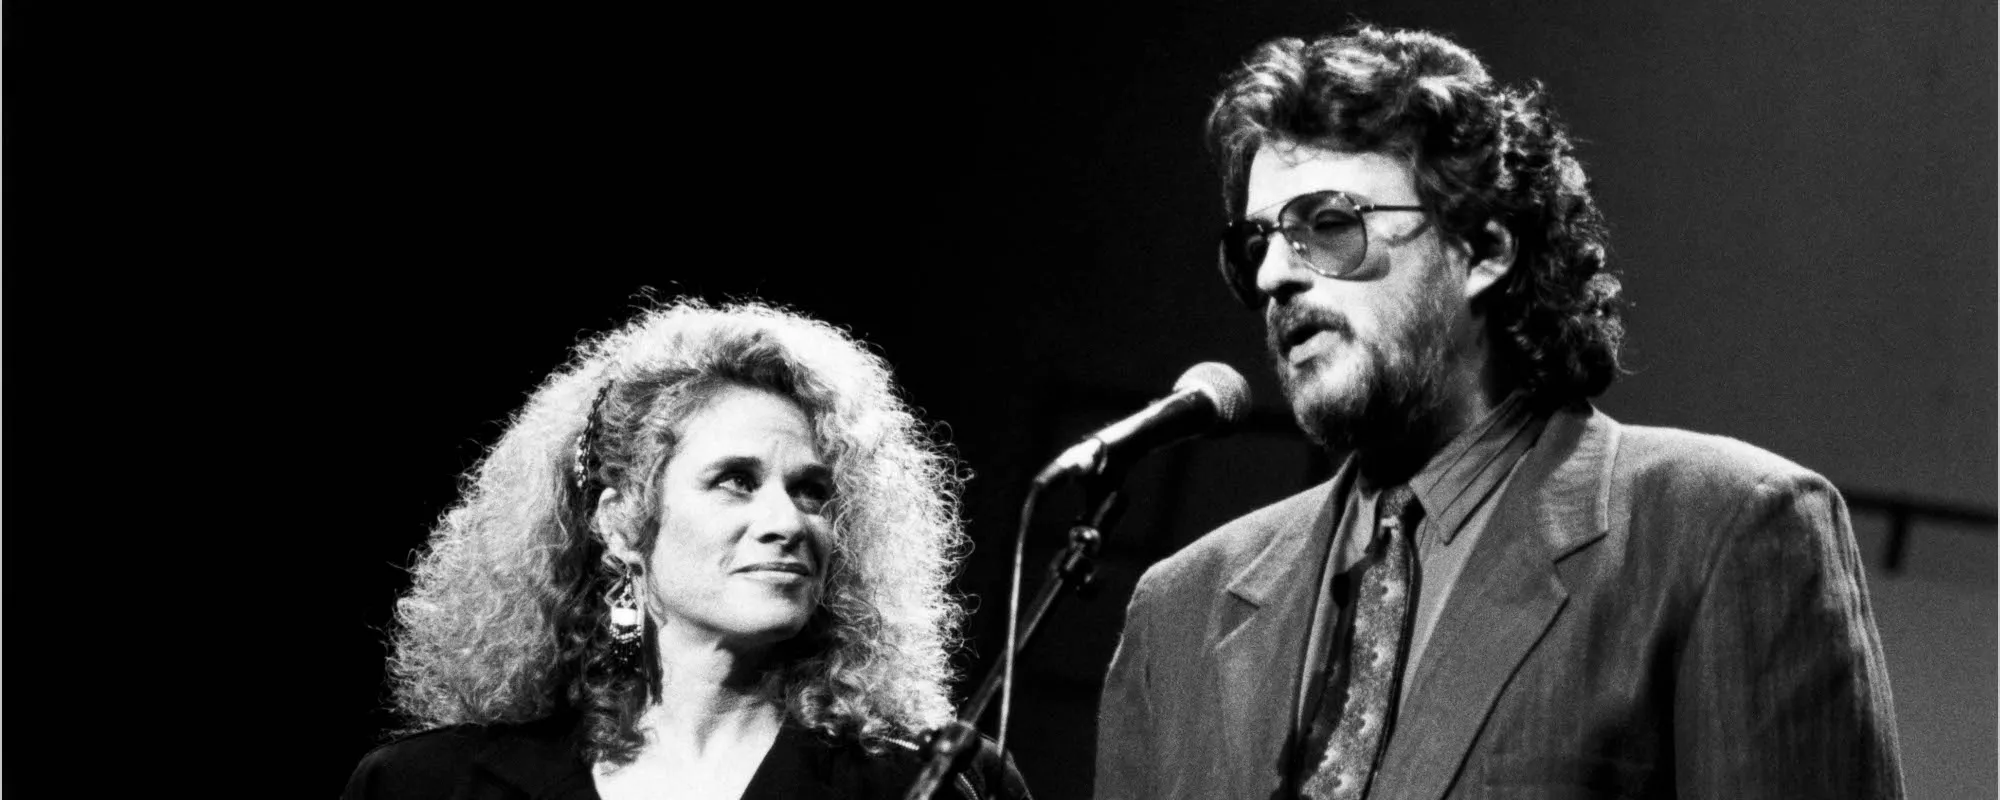 The New York City Roots of Songwriting Duo of Gerry Goffin and Carole King